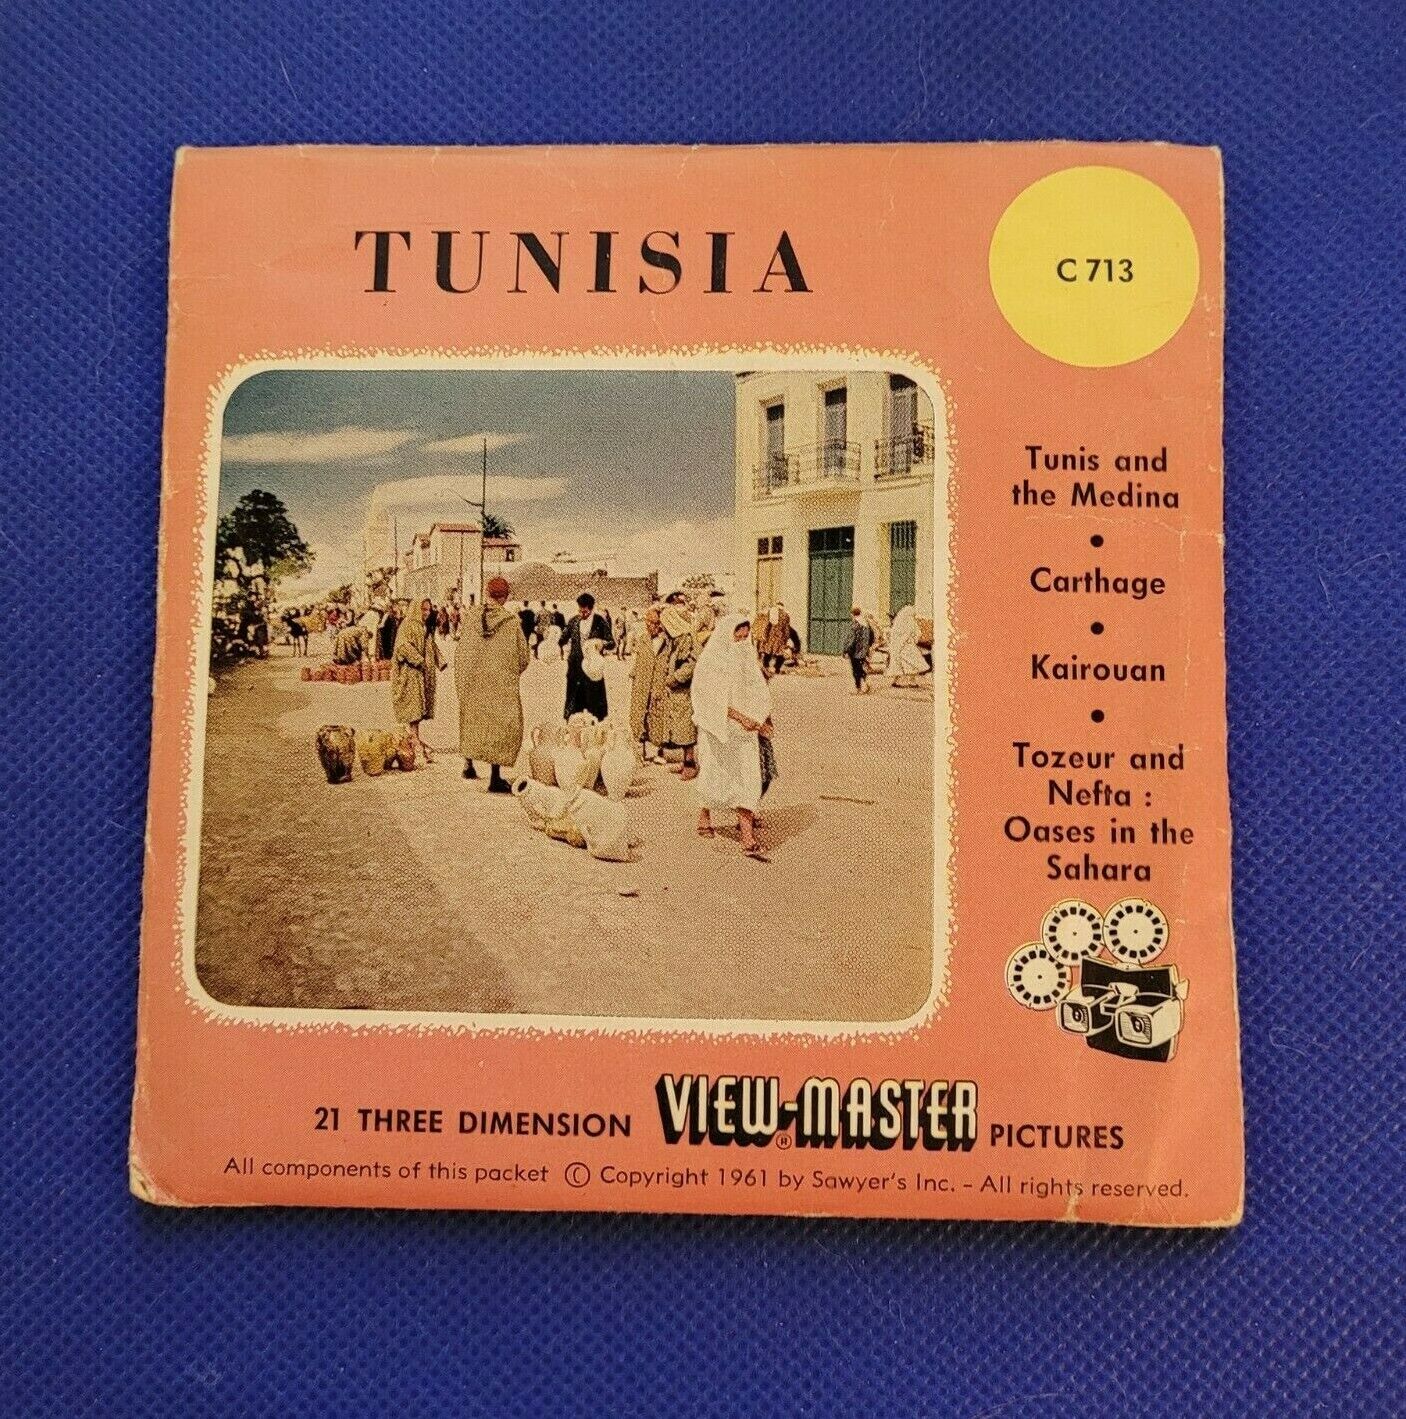 Rare Sawyer\'s Vintage C713 Tunisia North Africa view-master 3 Reels Packet Reel